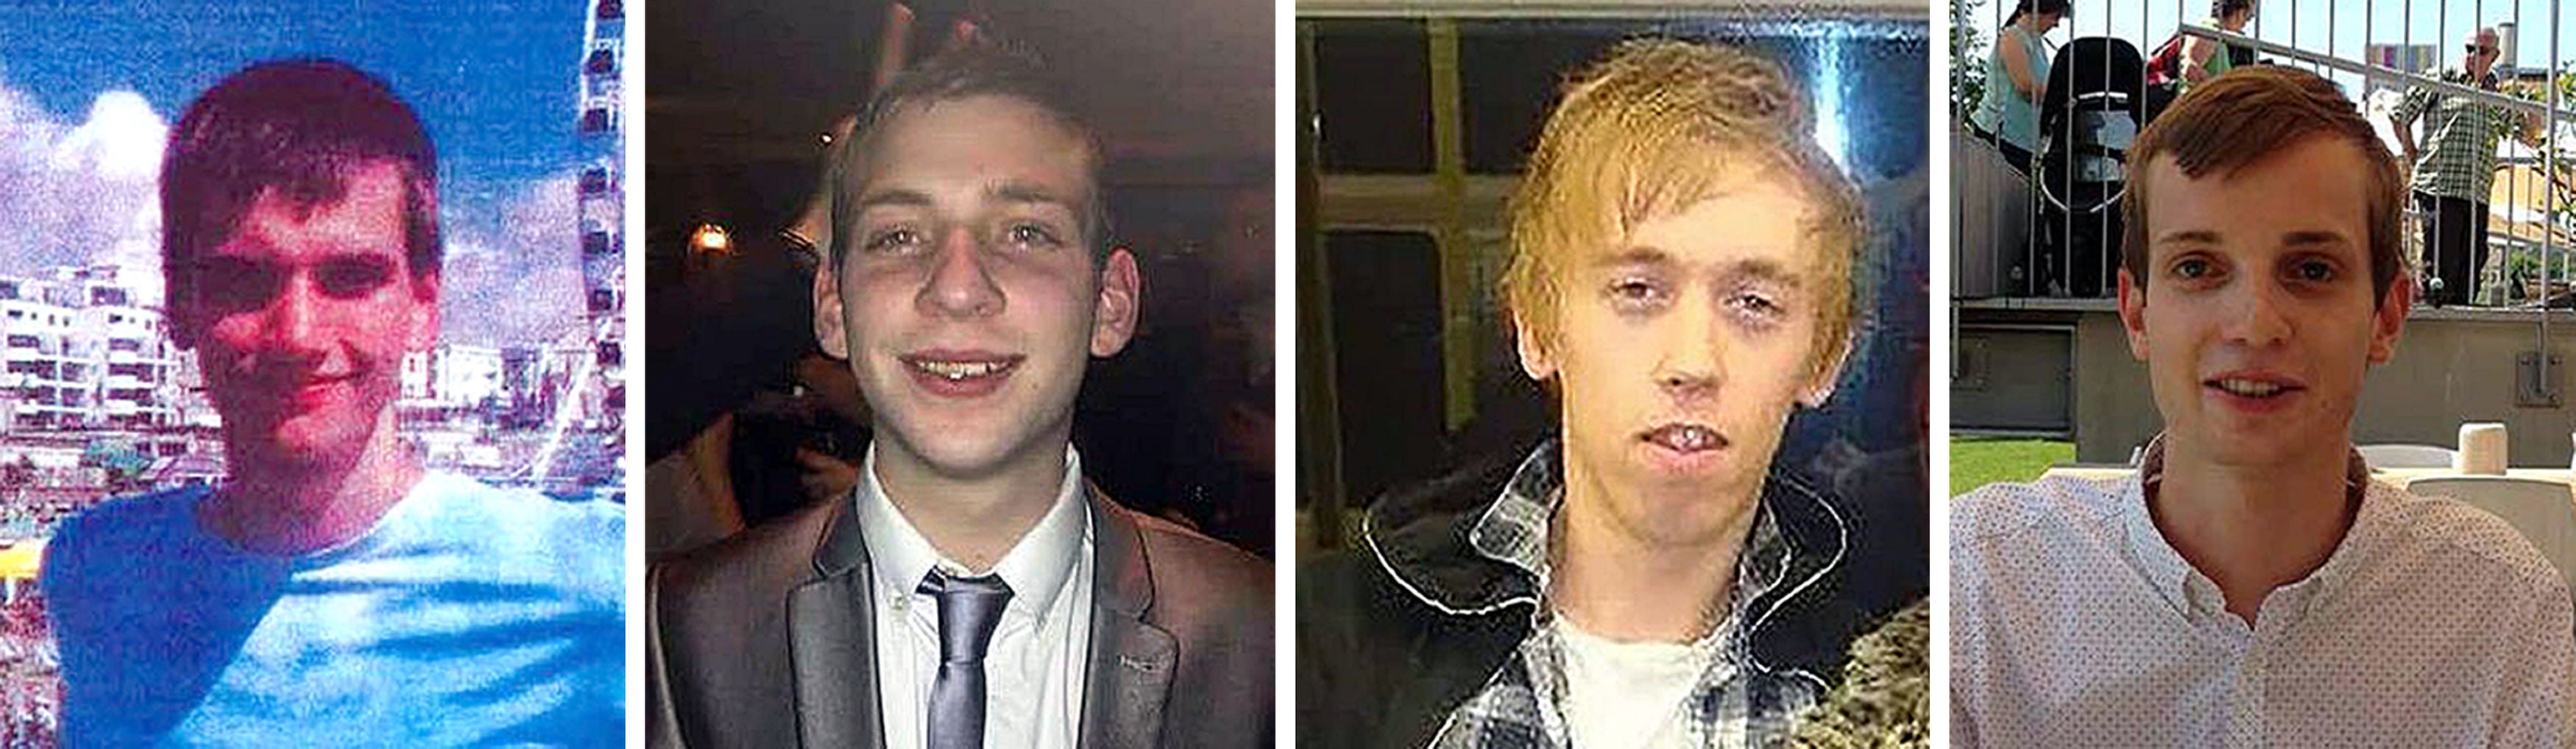 (L-R) Daniel Whitworth, Jack Taylor, Anthony Walgate and Gabriel Kovari were murdered by Port between 2014 and 2015.